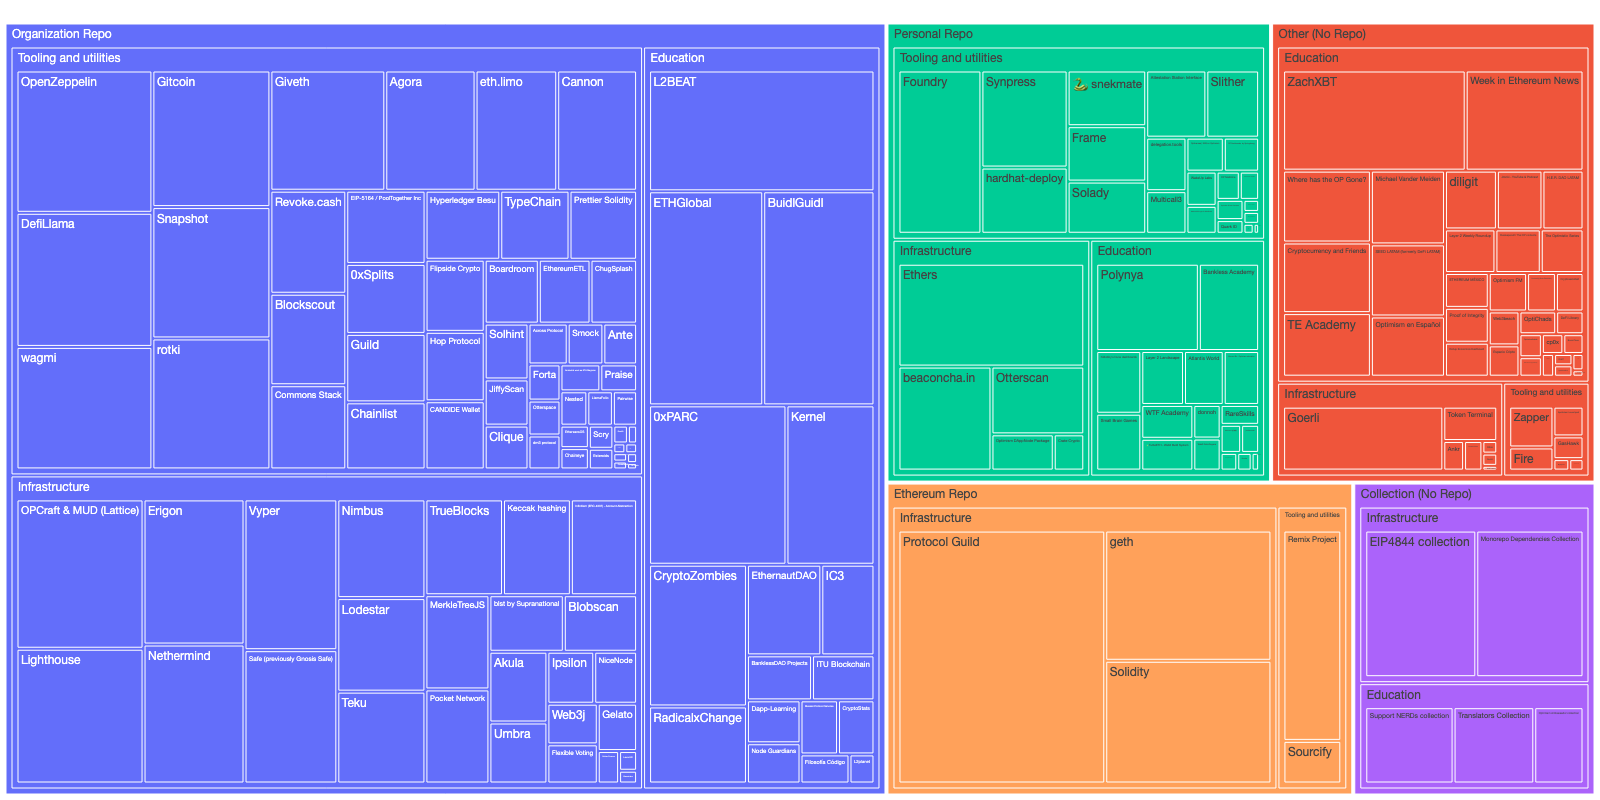 Treemap of projects, based on entity and category 